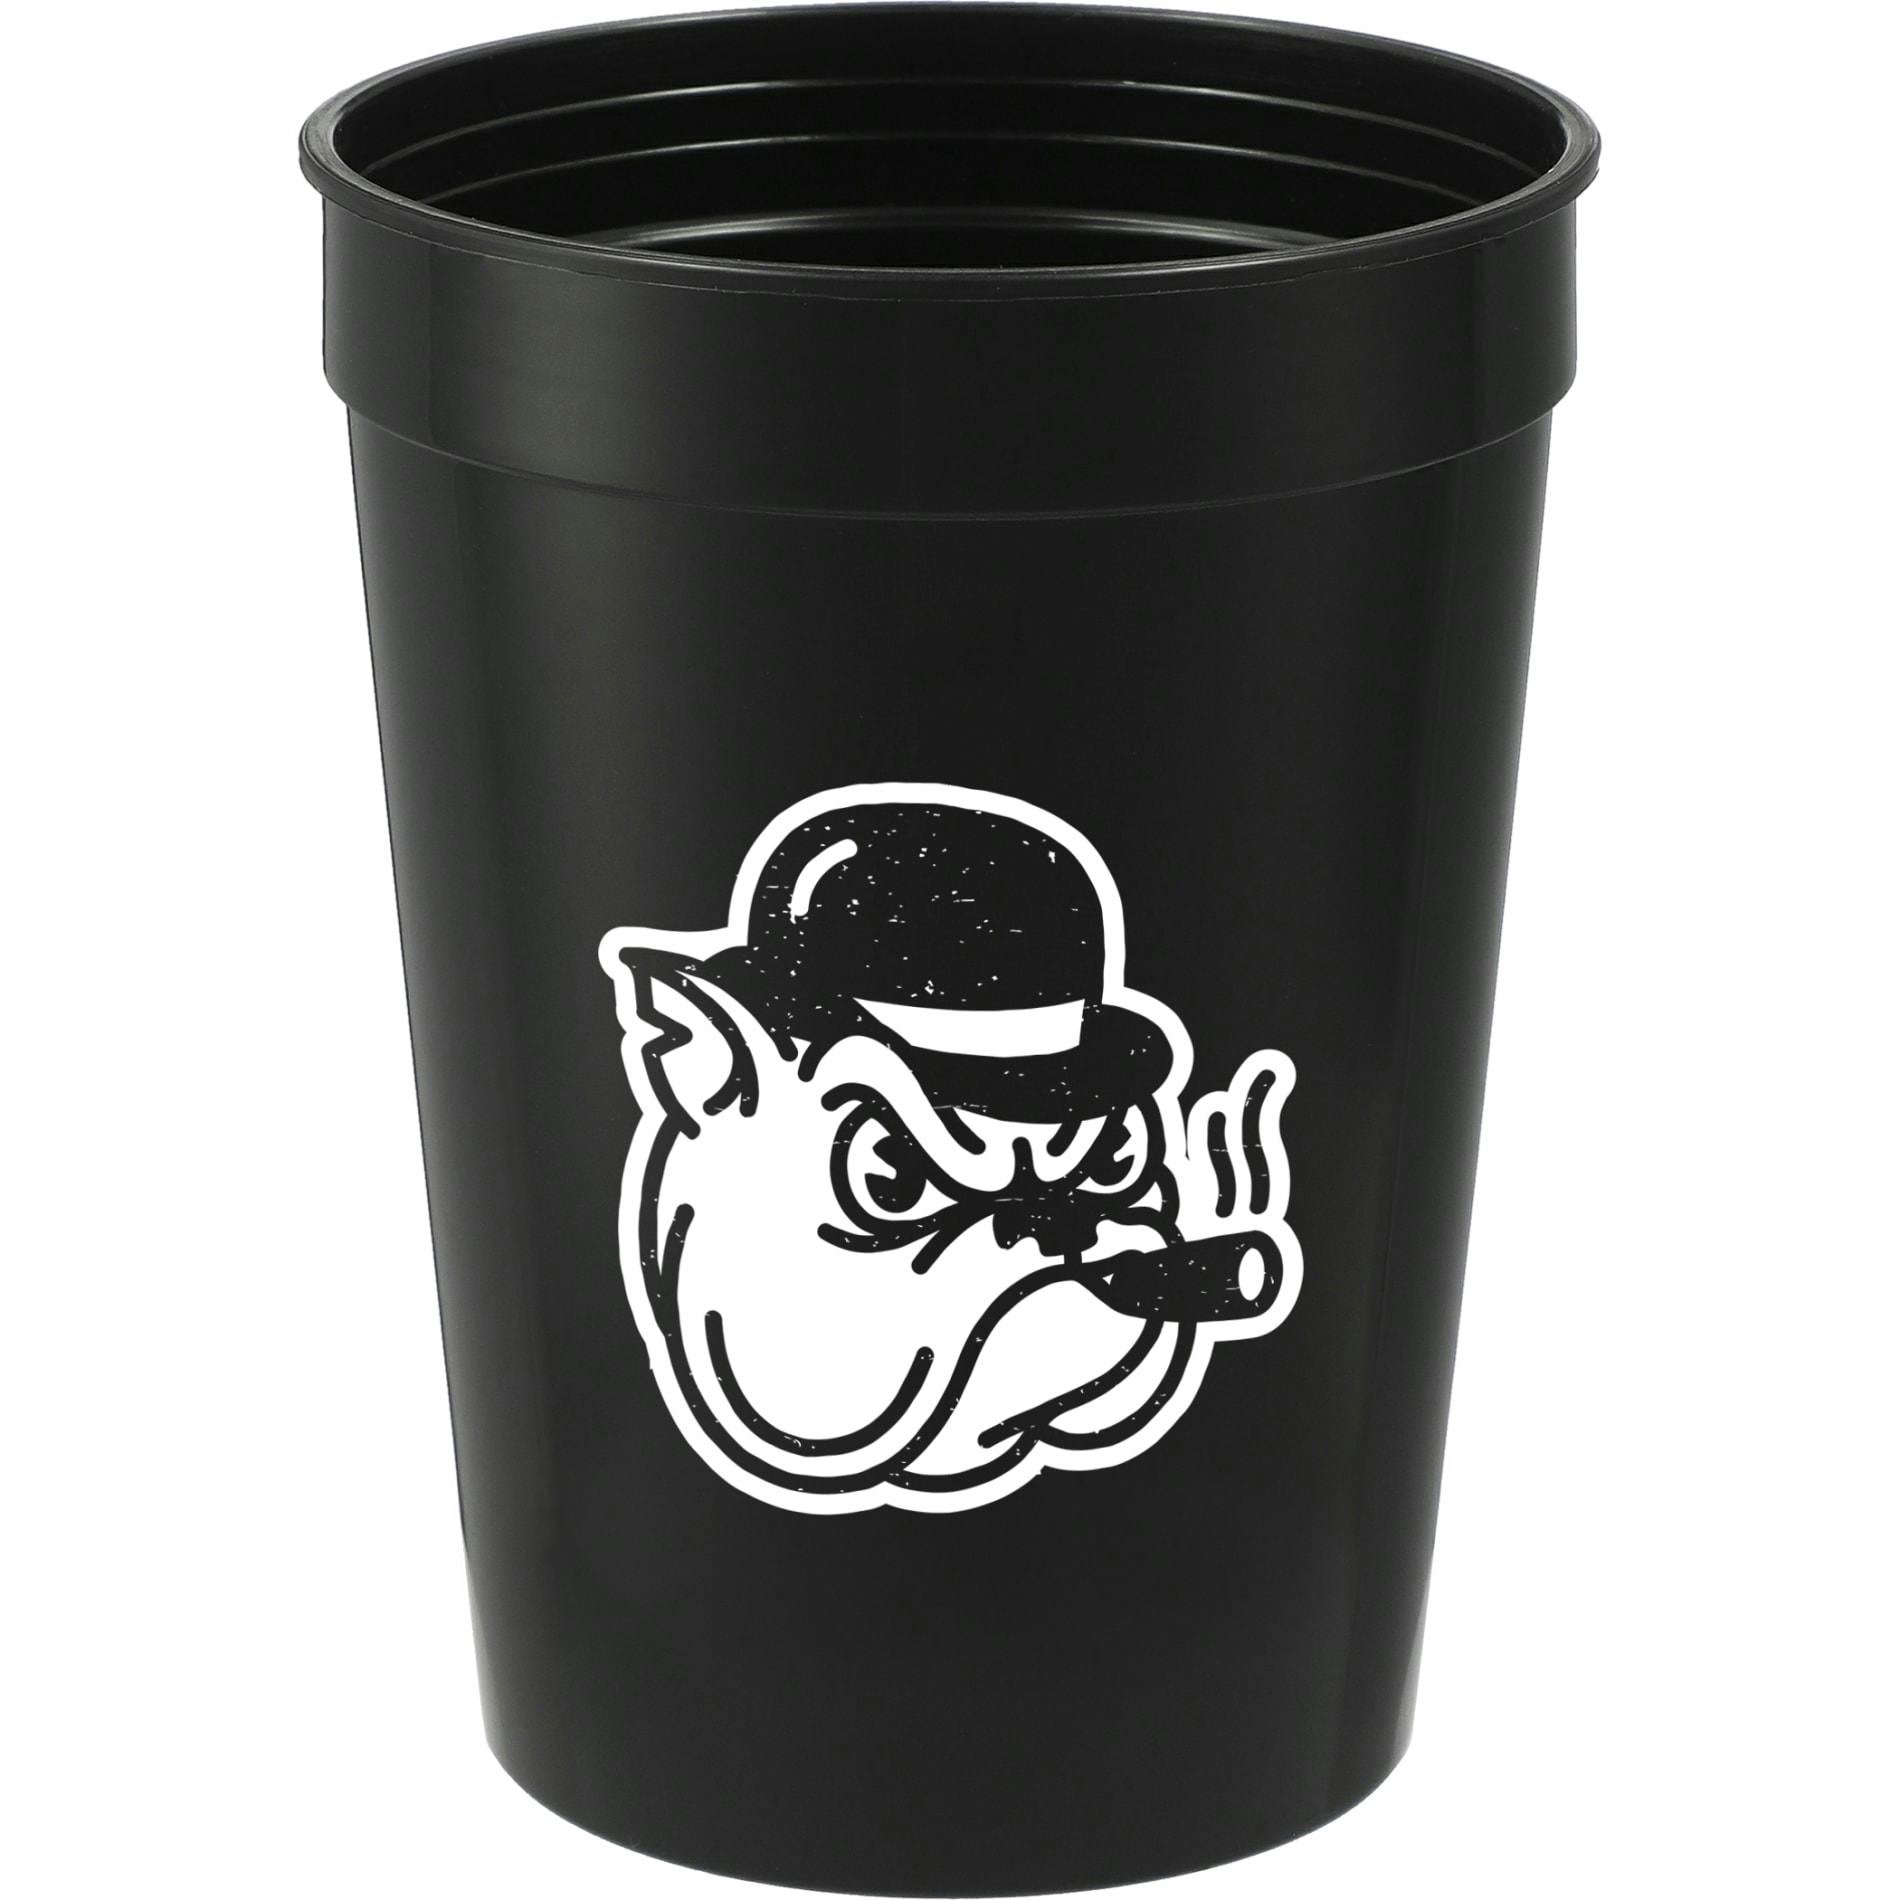 Solid 12oz Stadium Cup - additional Image 1